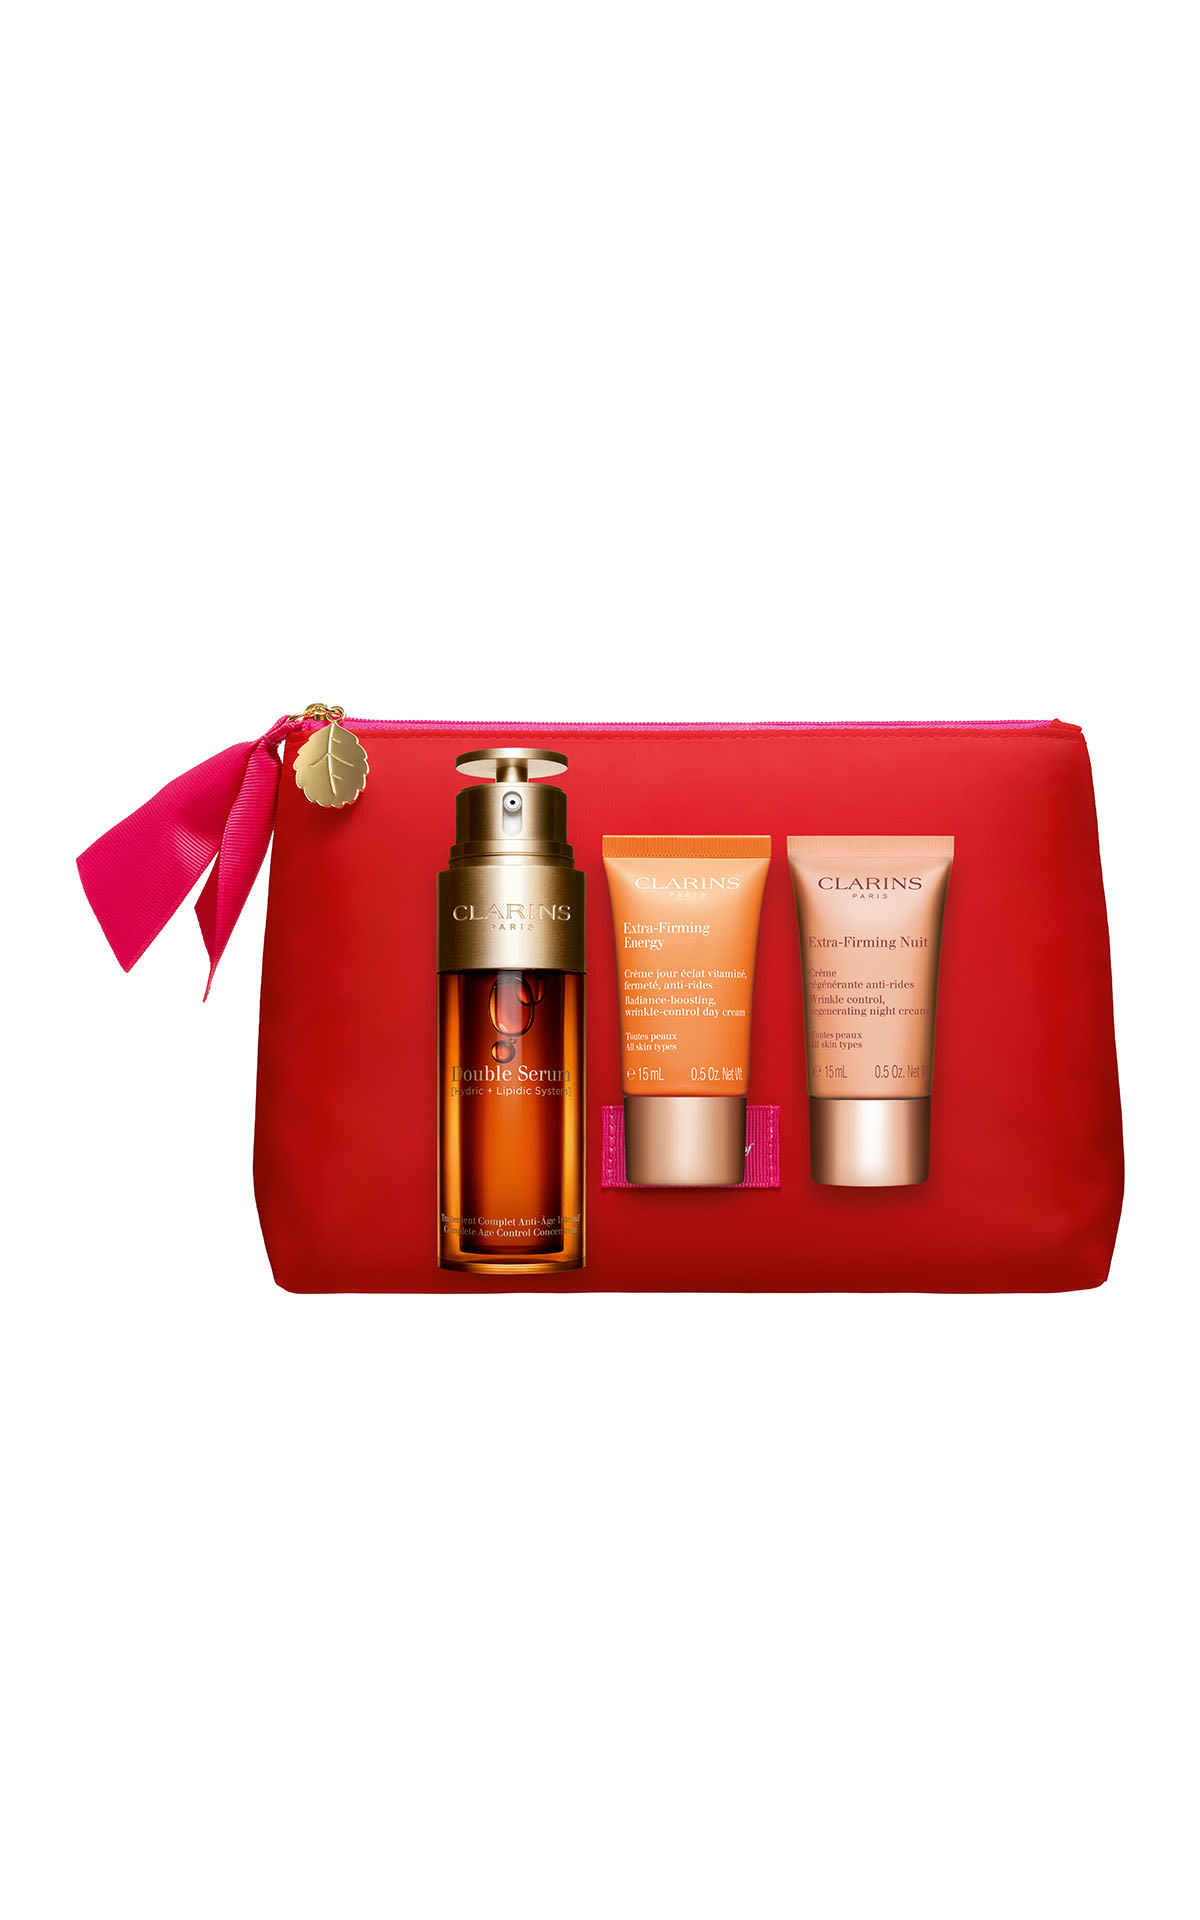 Clarins Double serum and extra-firming collection from Bicester Village